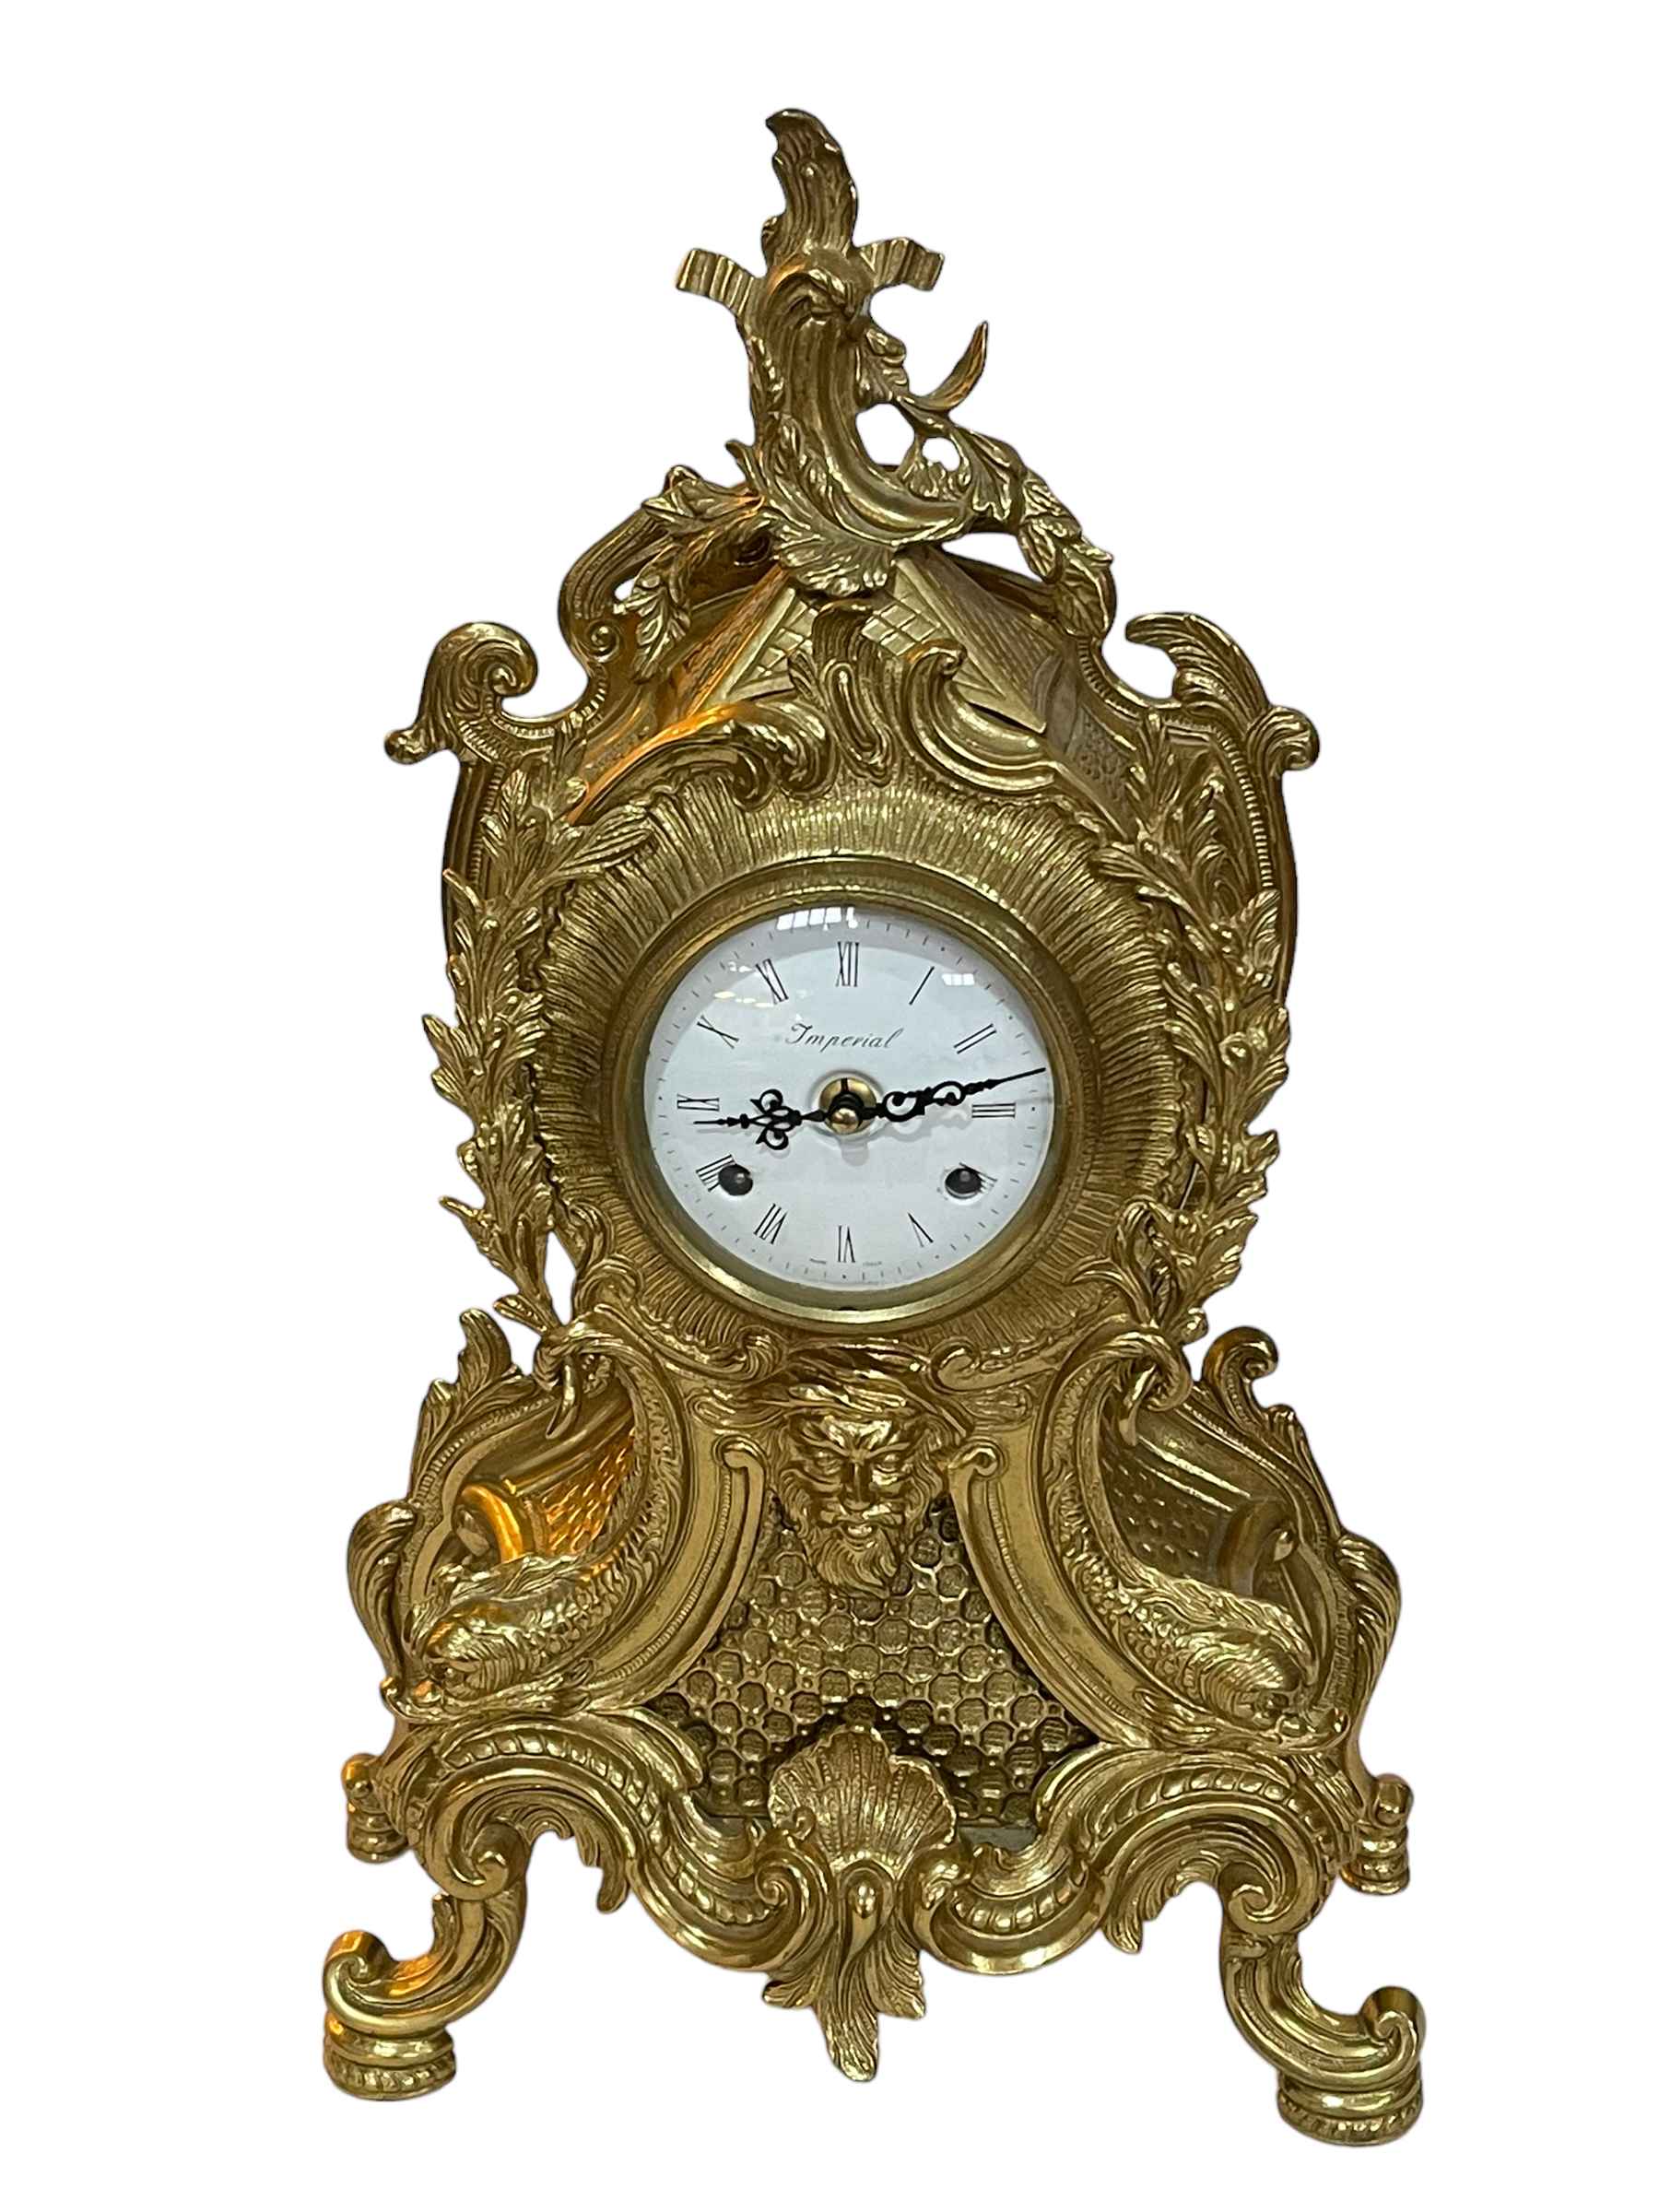 Ornate brass mantel clock with white dial, 48cm.